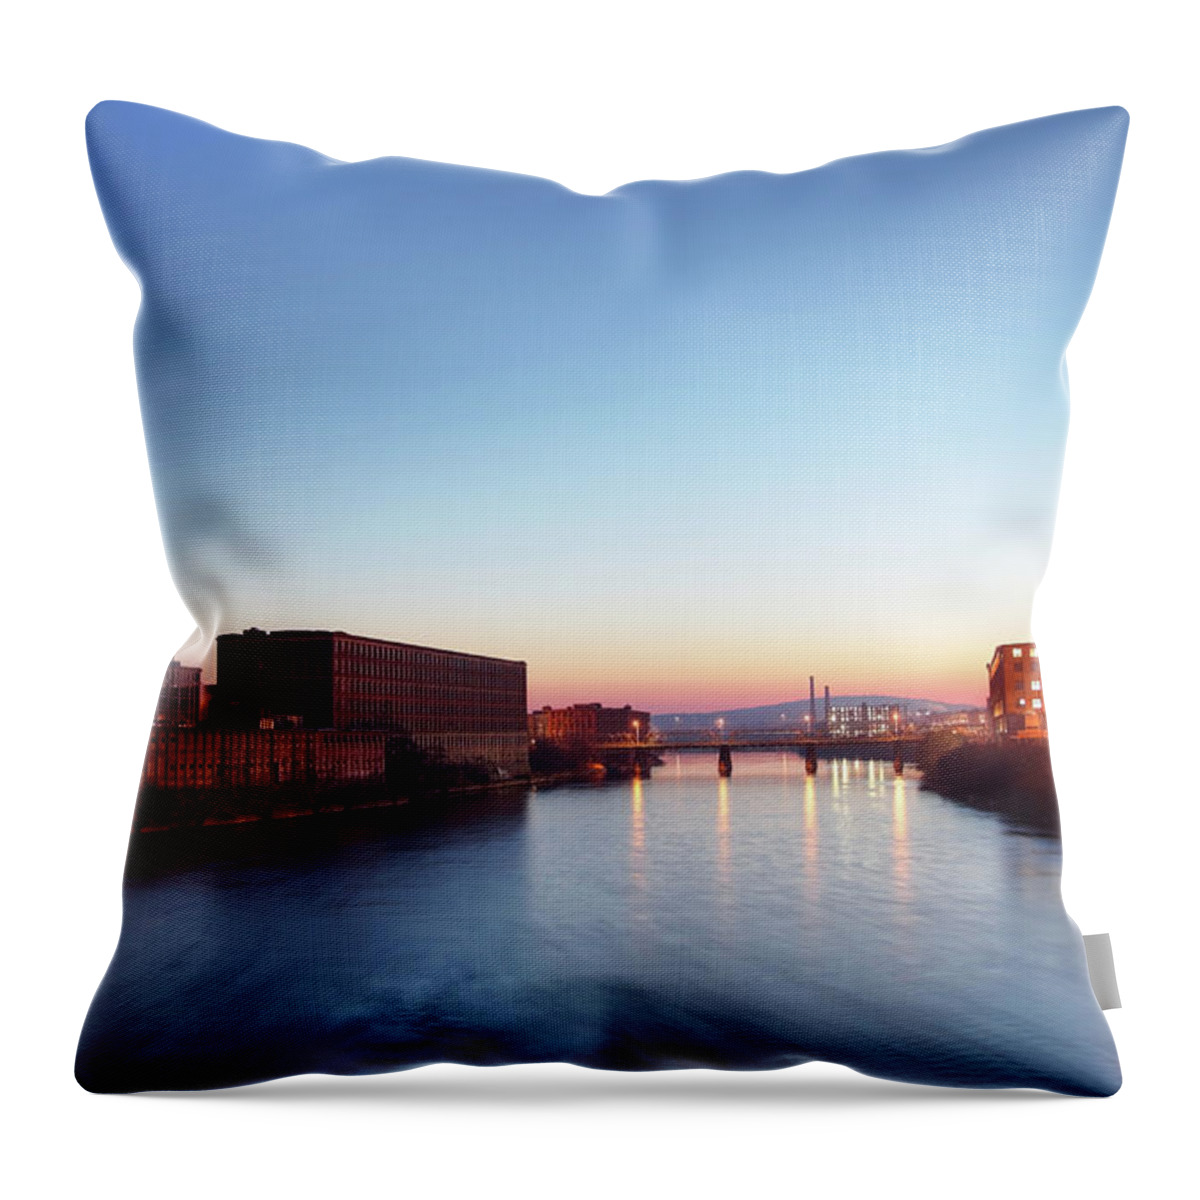 Built Structure Throw Pillow featuring the photograph Lawrence, Massachusetts by Denistangneyjr